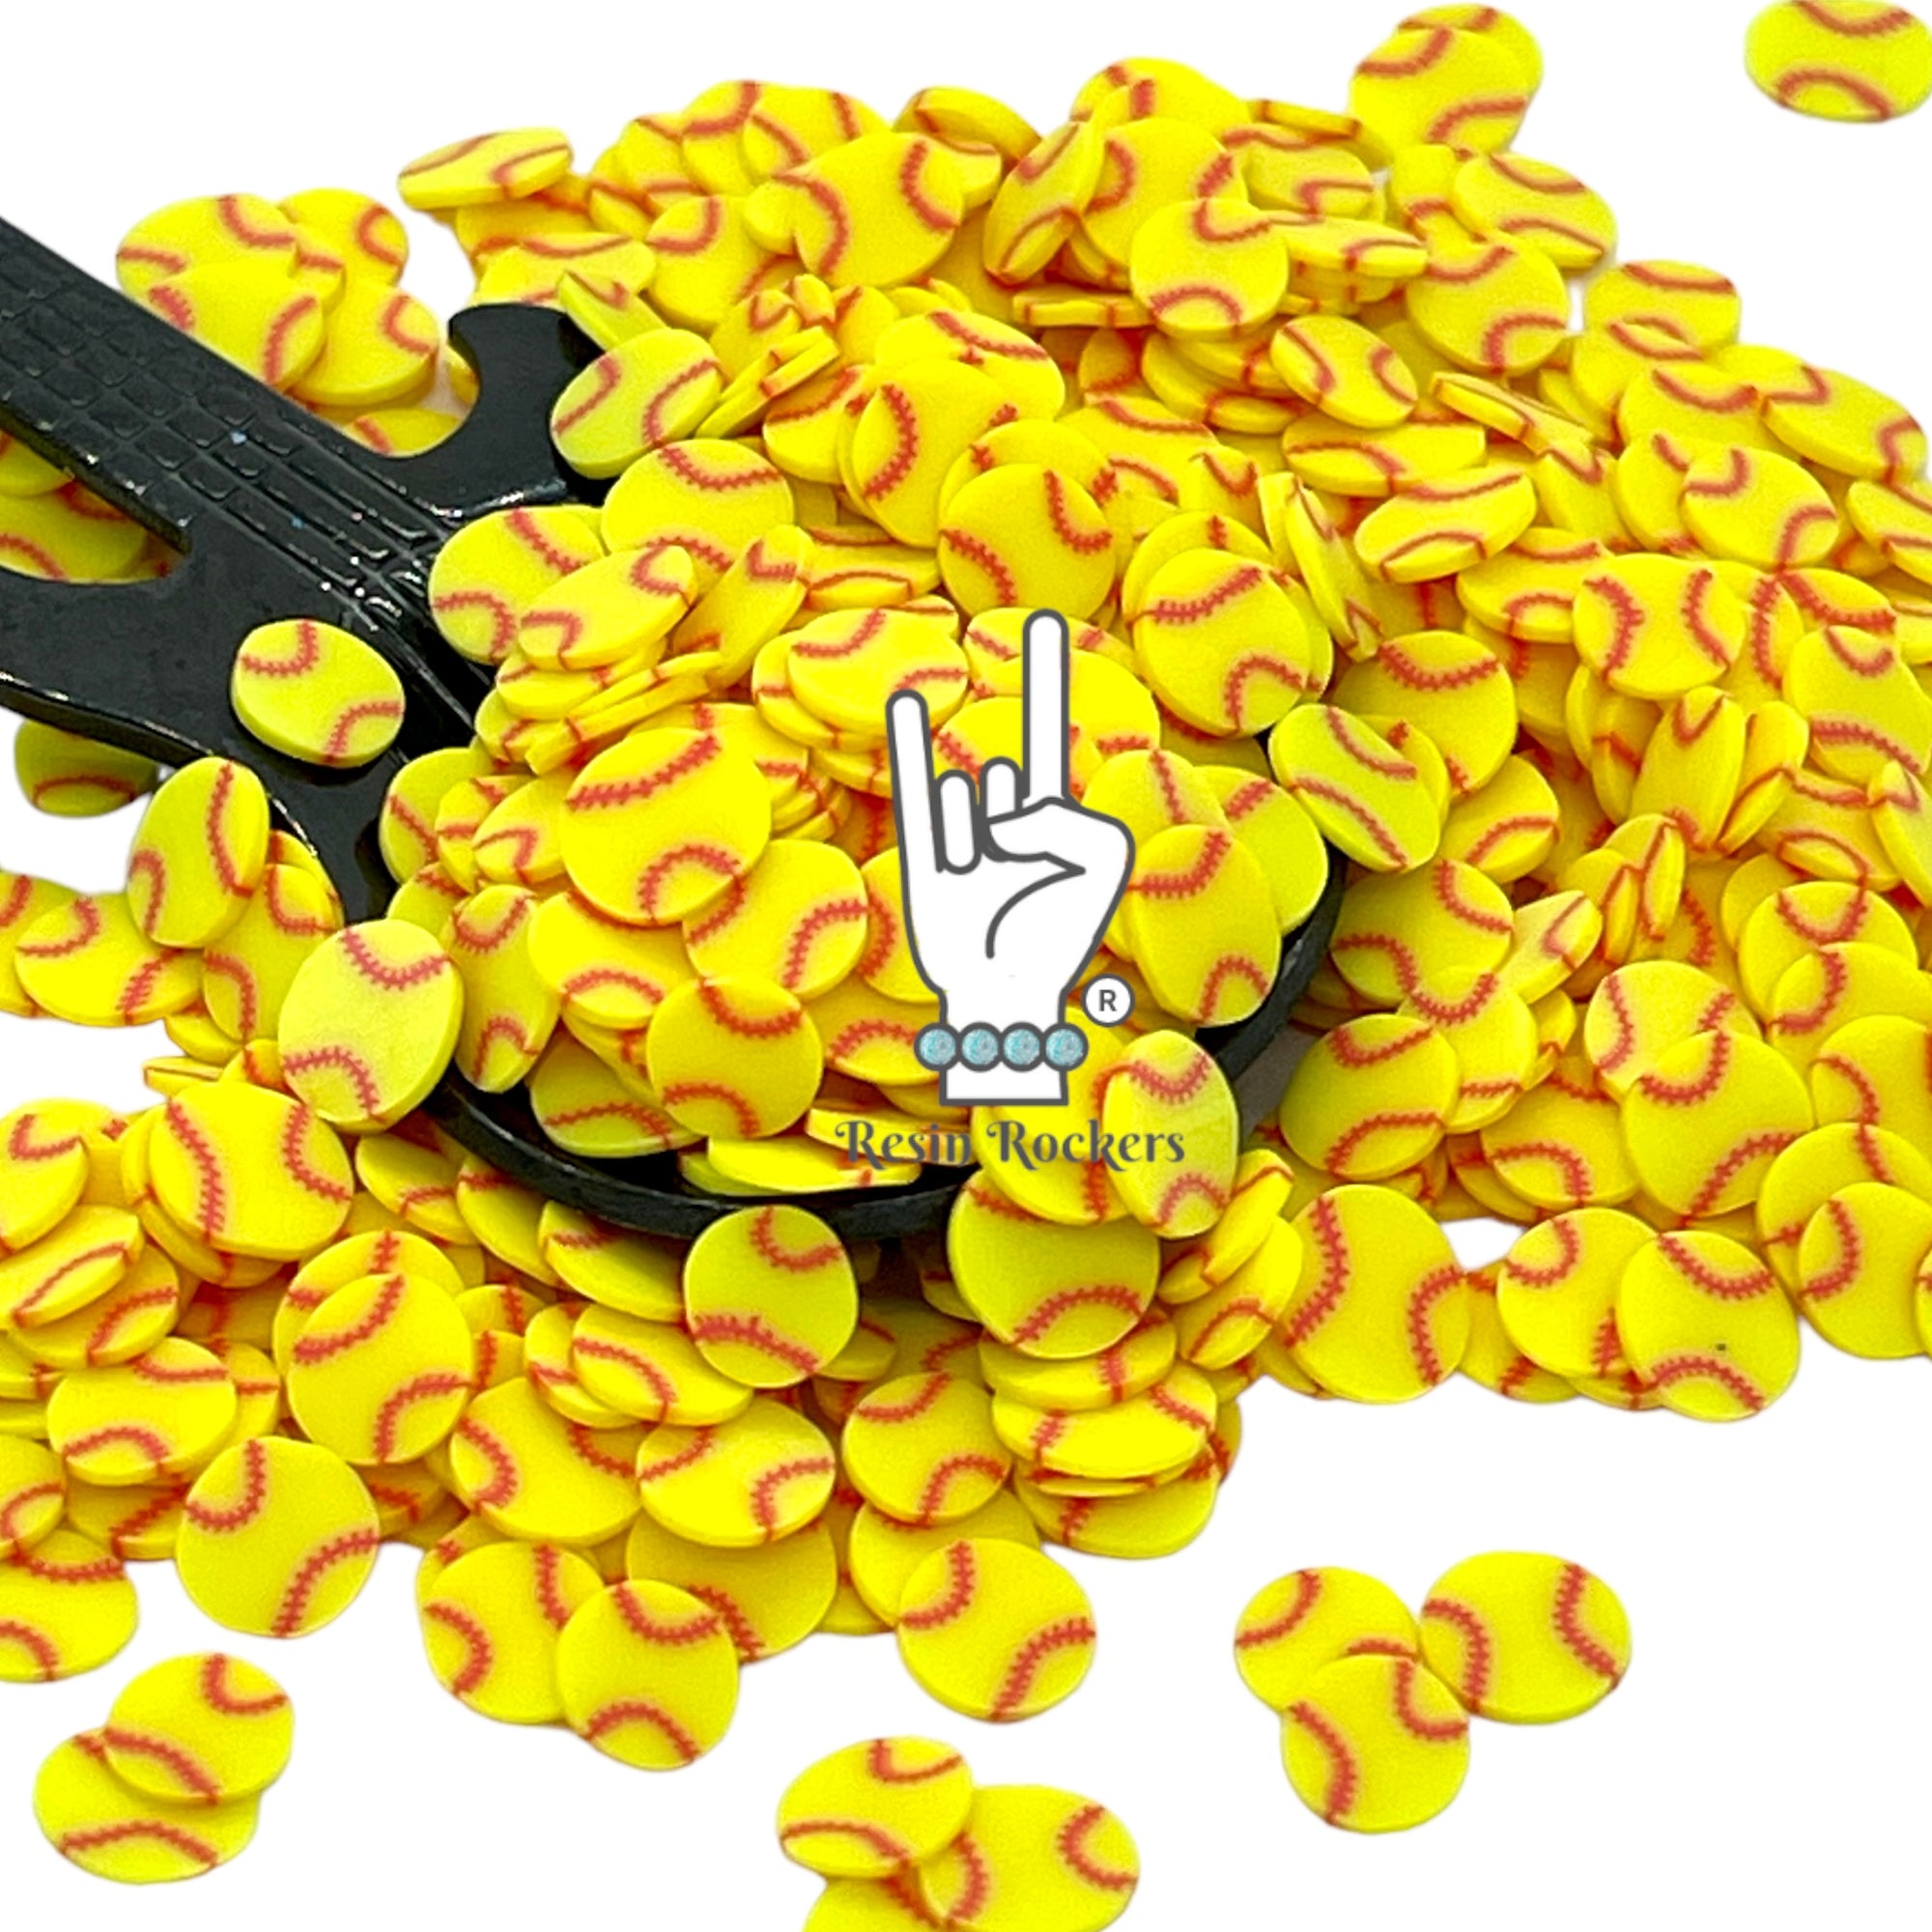 25 Yellow Emoji Beads Polymer Clay Smiley Face Beads Coin Beads by Smileyboy | Michaels